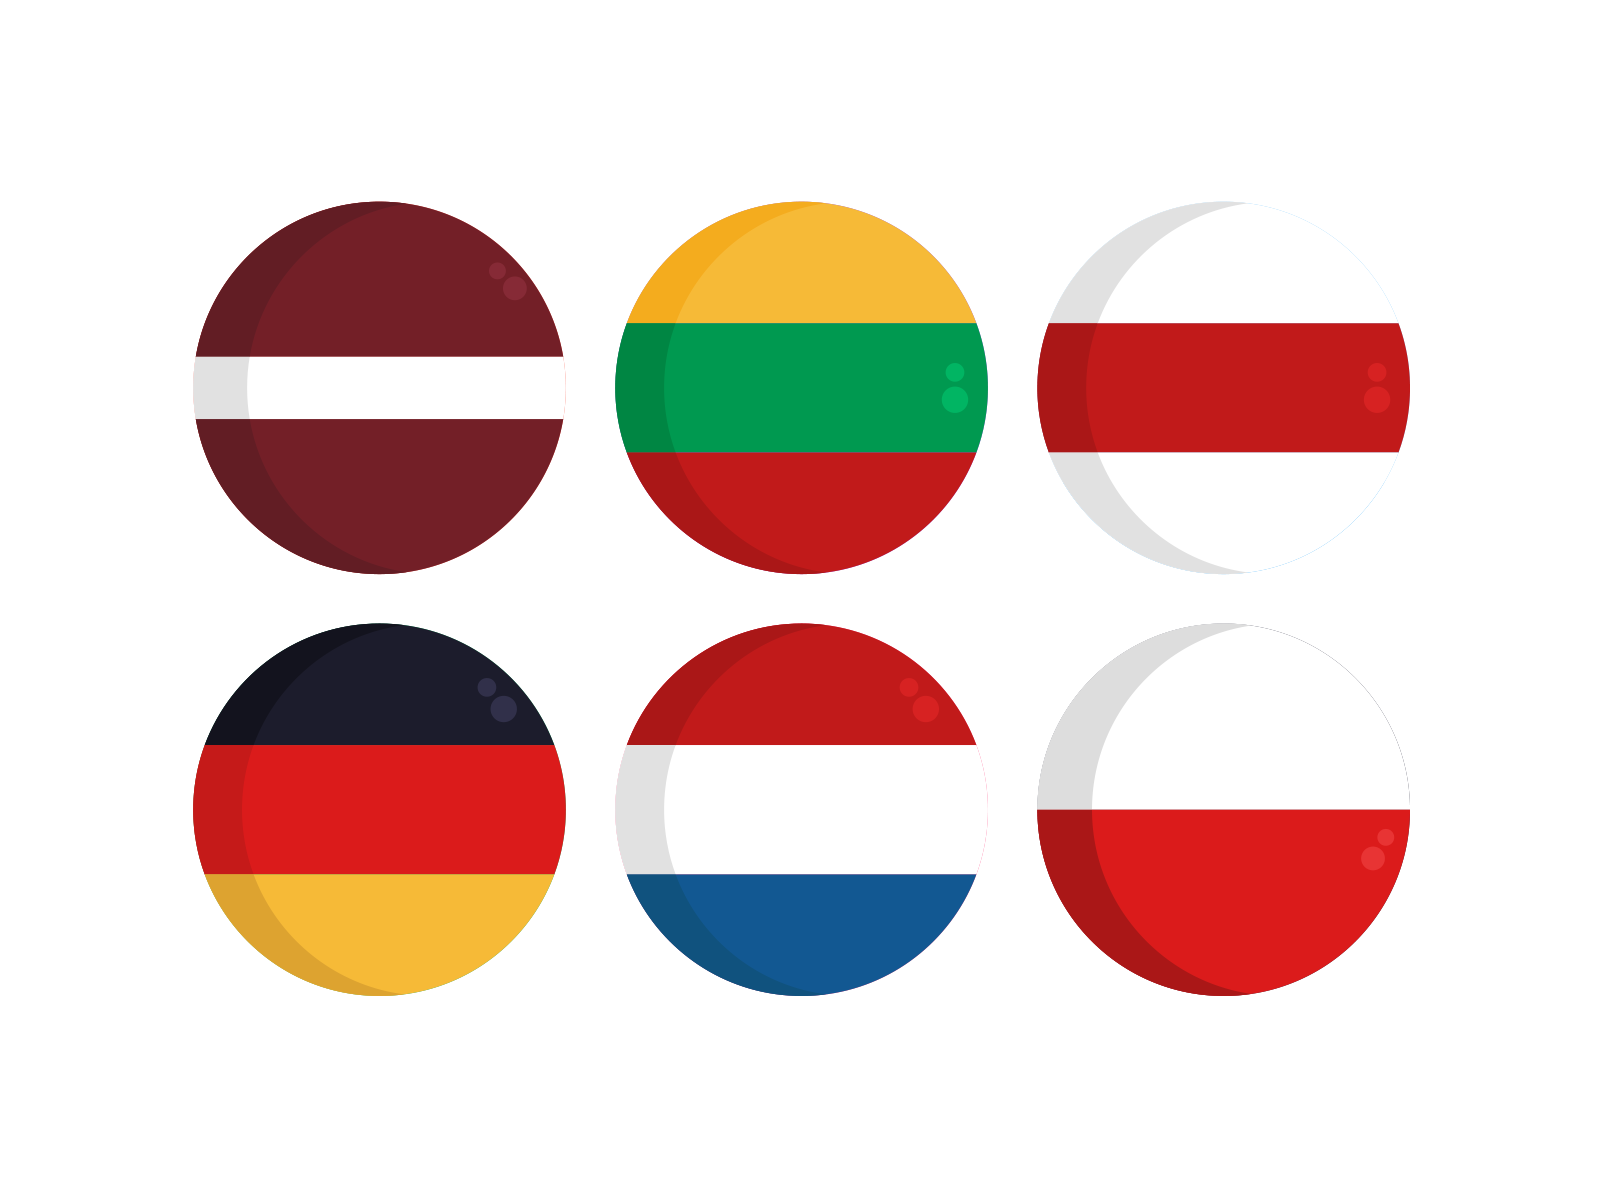 gtk stock icons for country flag